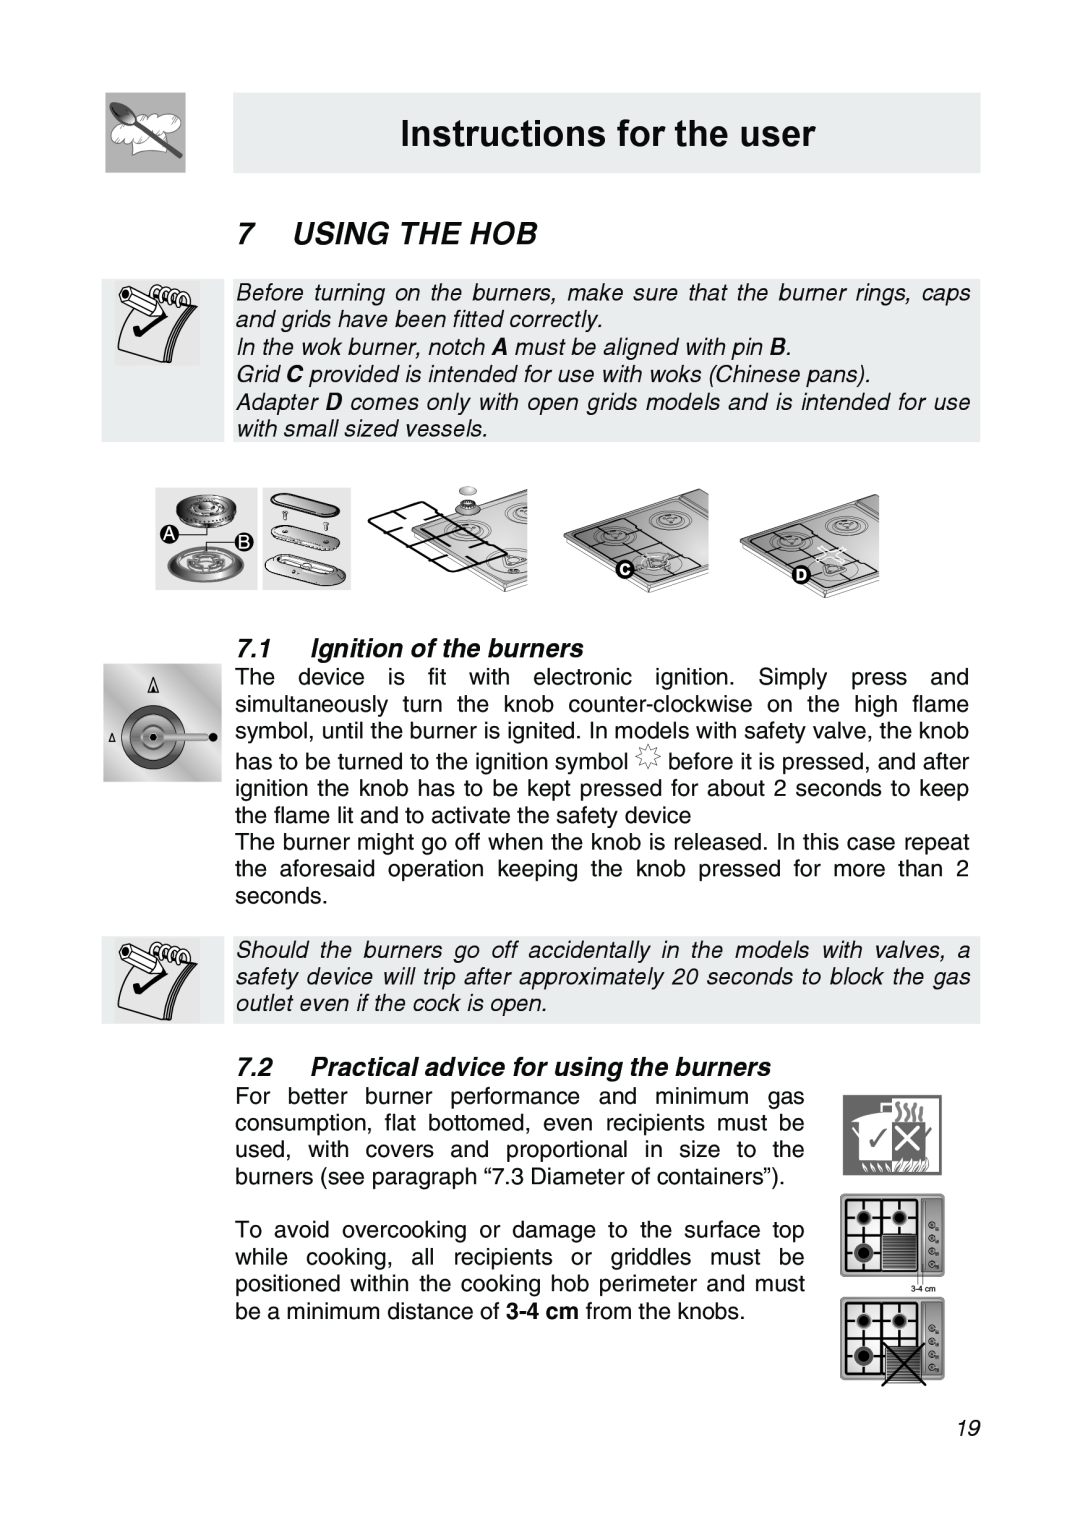 Smeg CIR34XS Instructions for the user, Using The Hob, Ignition of the burners, Practical advice for using the burners 